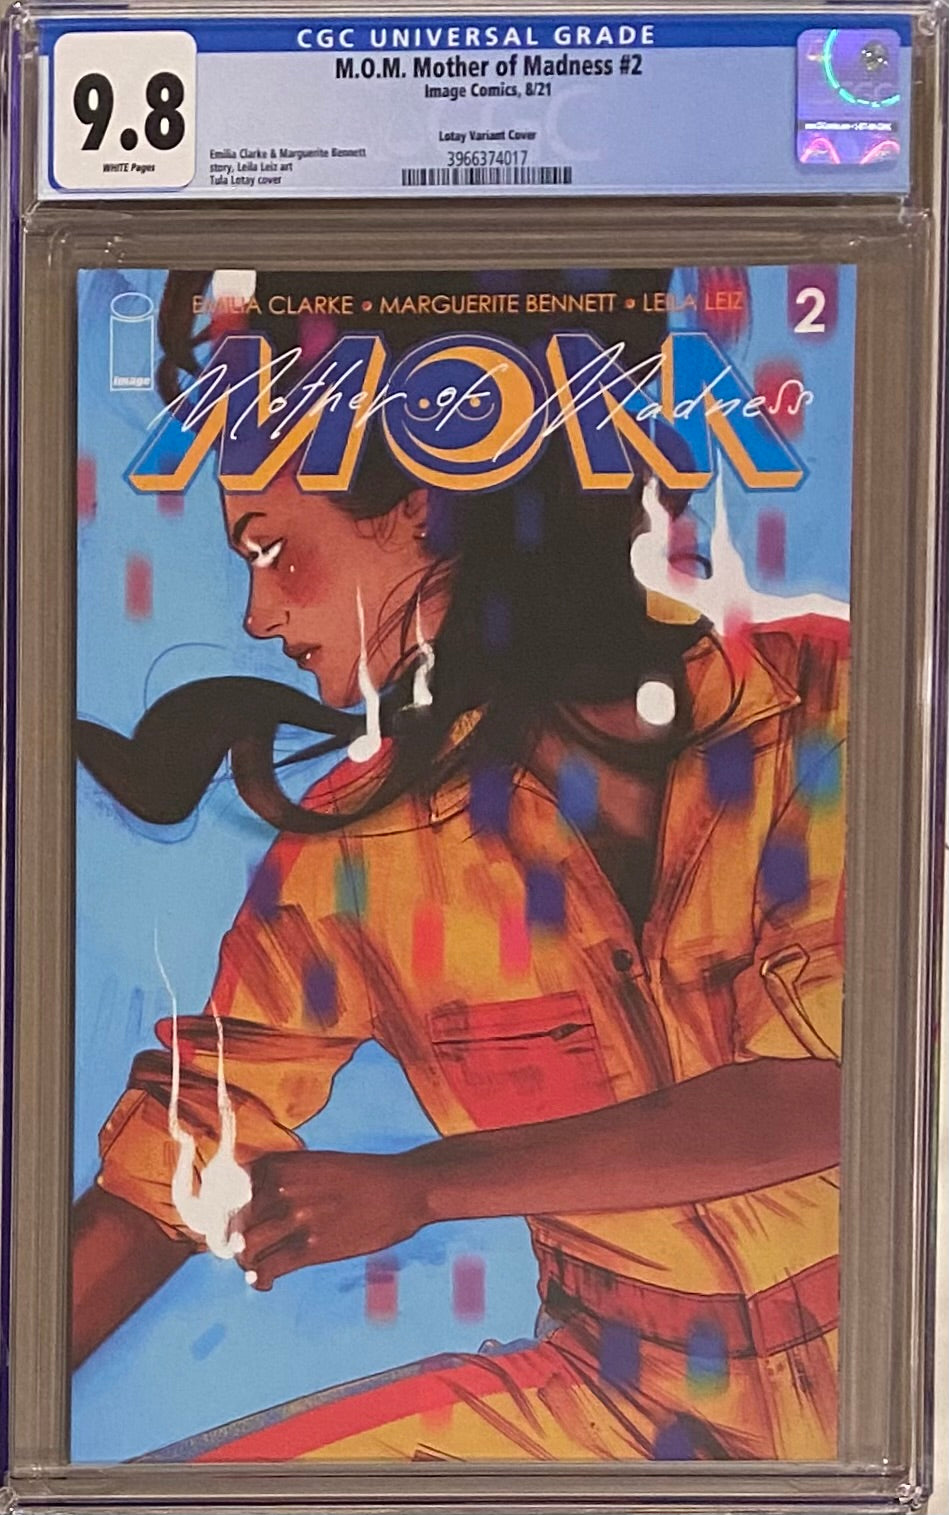 MOM Mother of Madness #2 Lotay Variant CGC 9.8